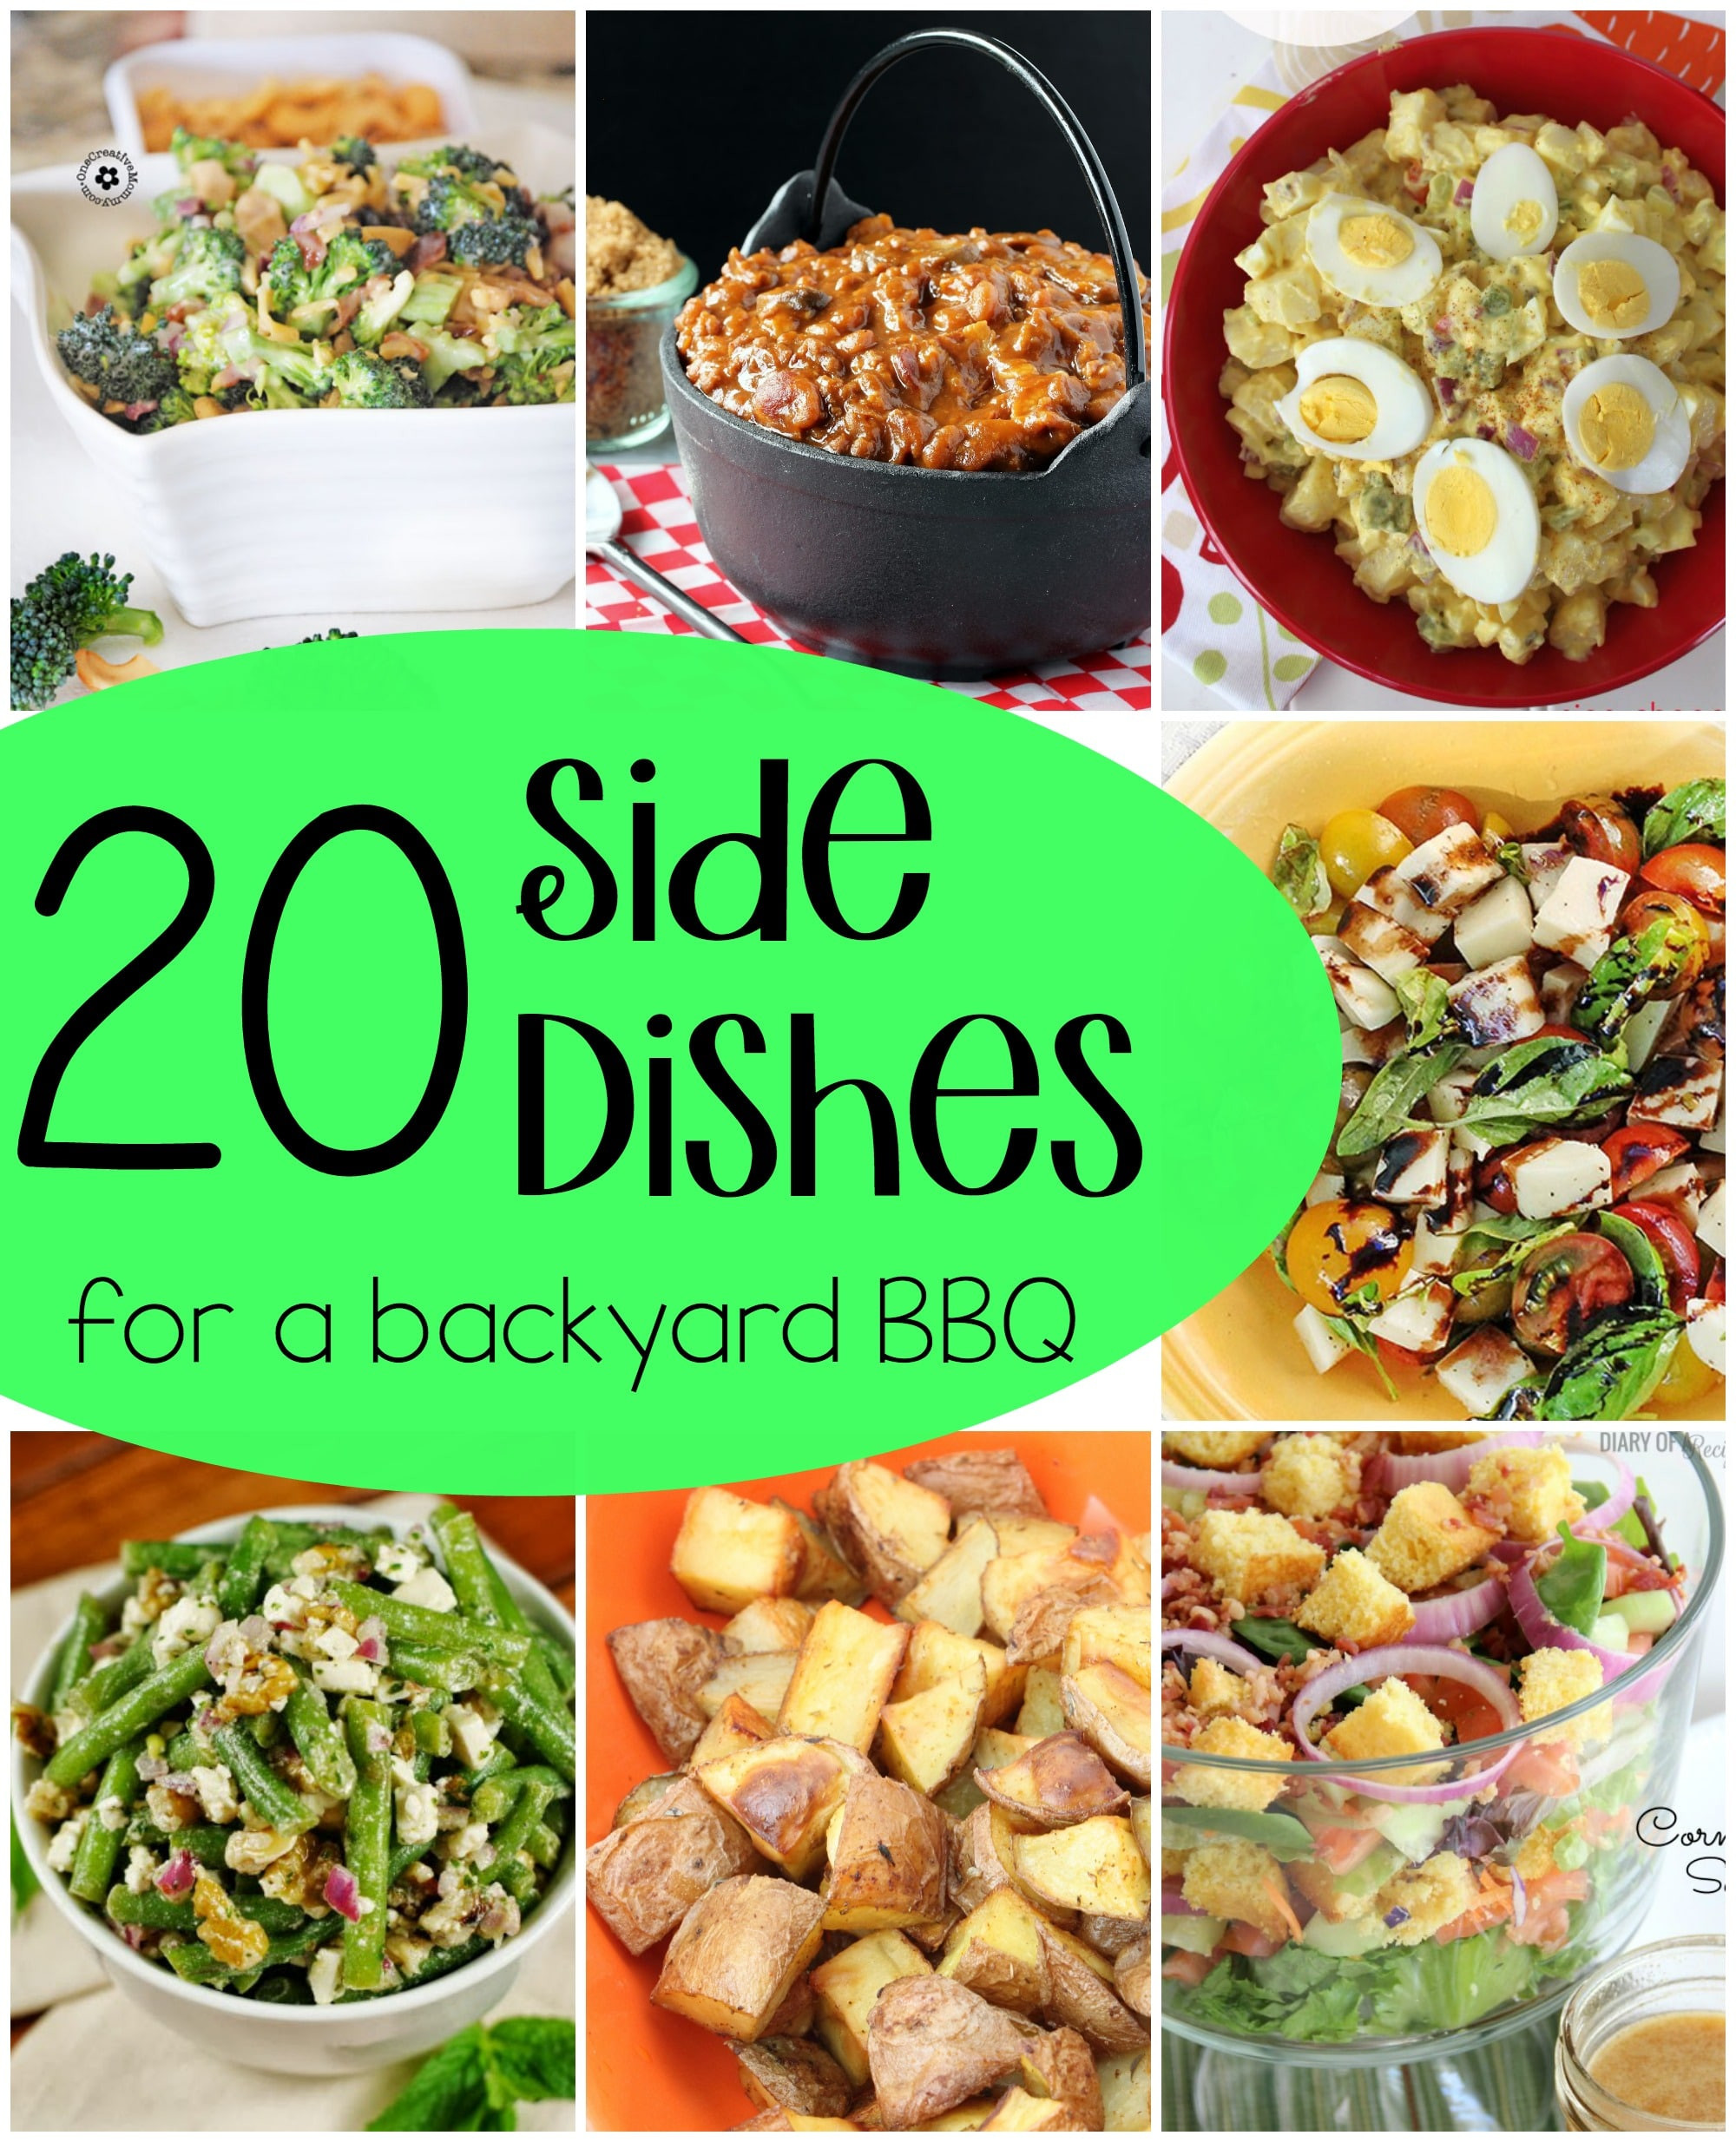 Barbecue Side Dishes
 Side Dishes for a BBQ Typically Simple